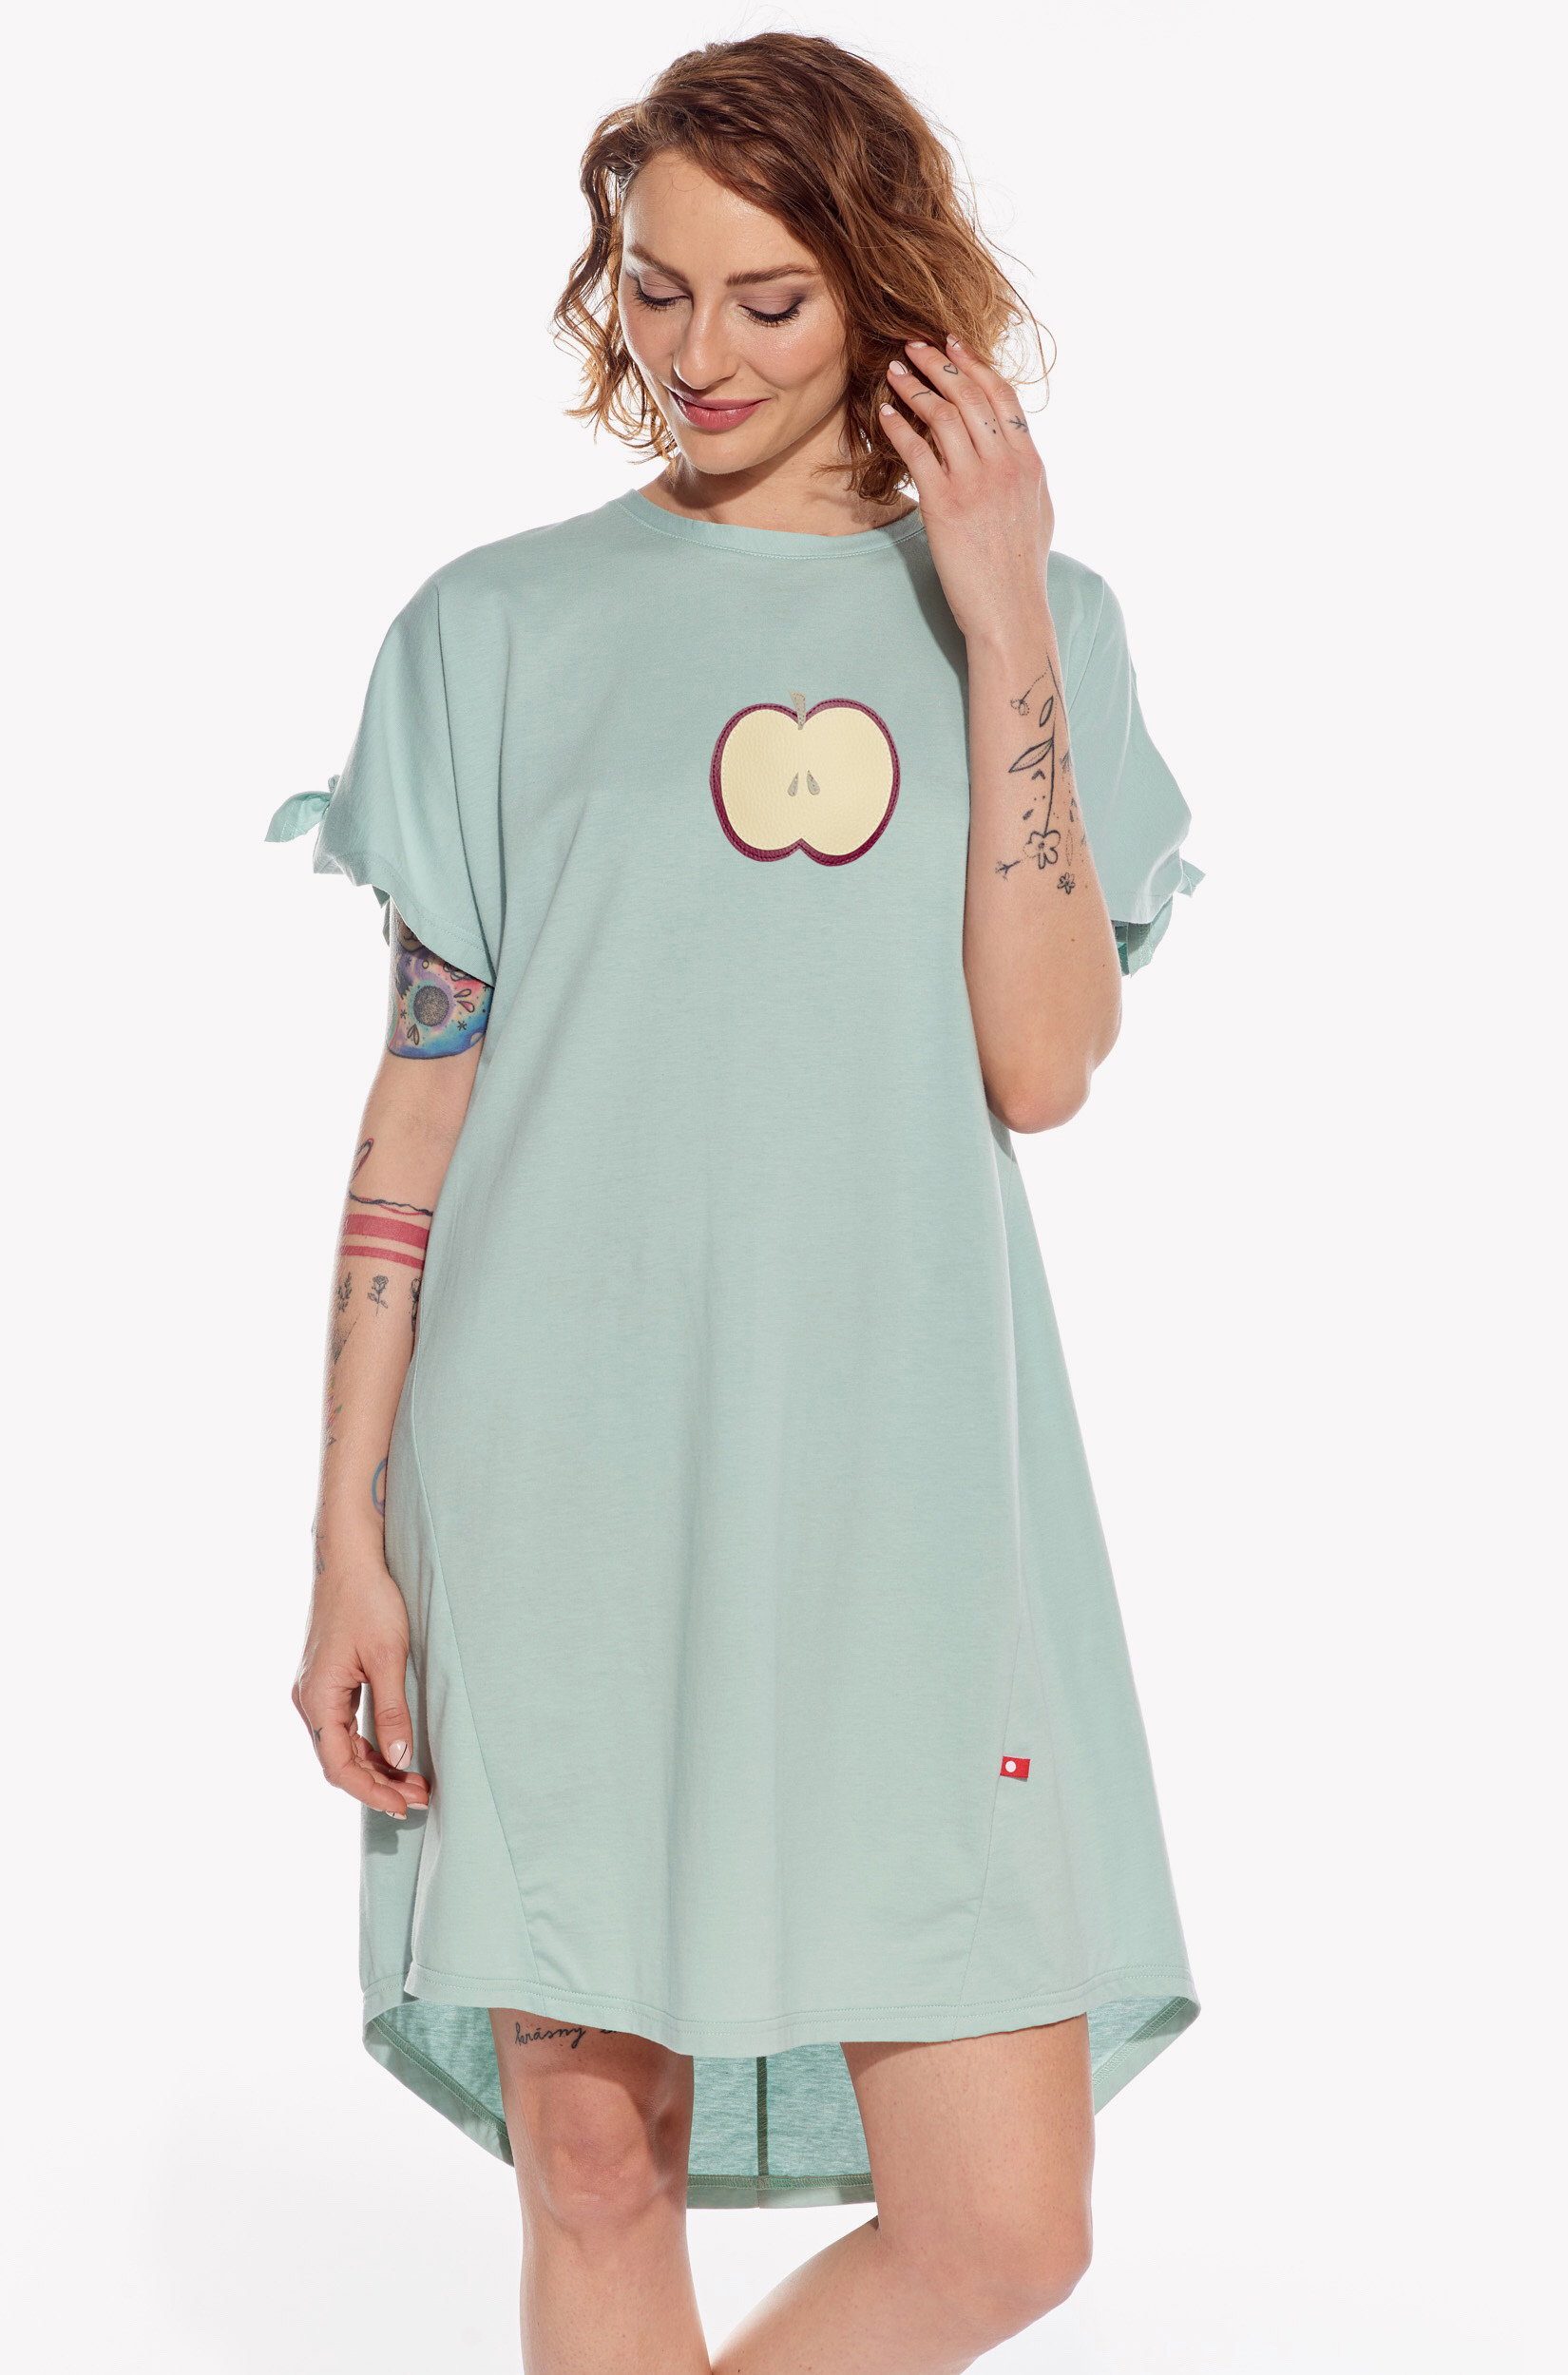 Dresses with apple